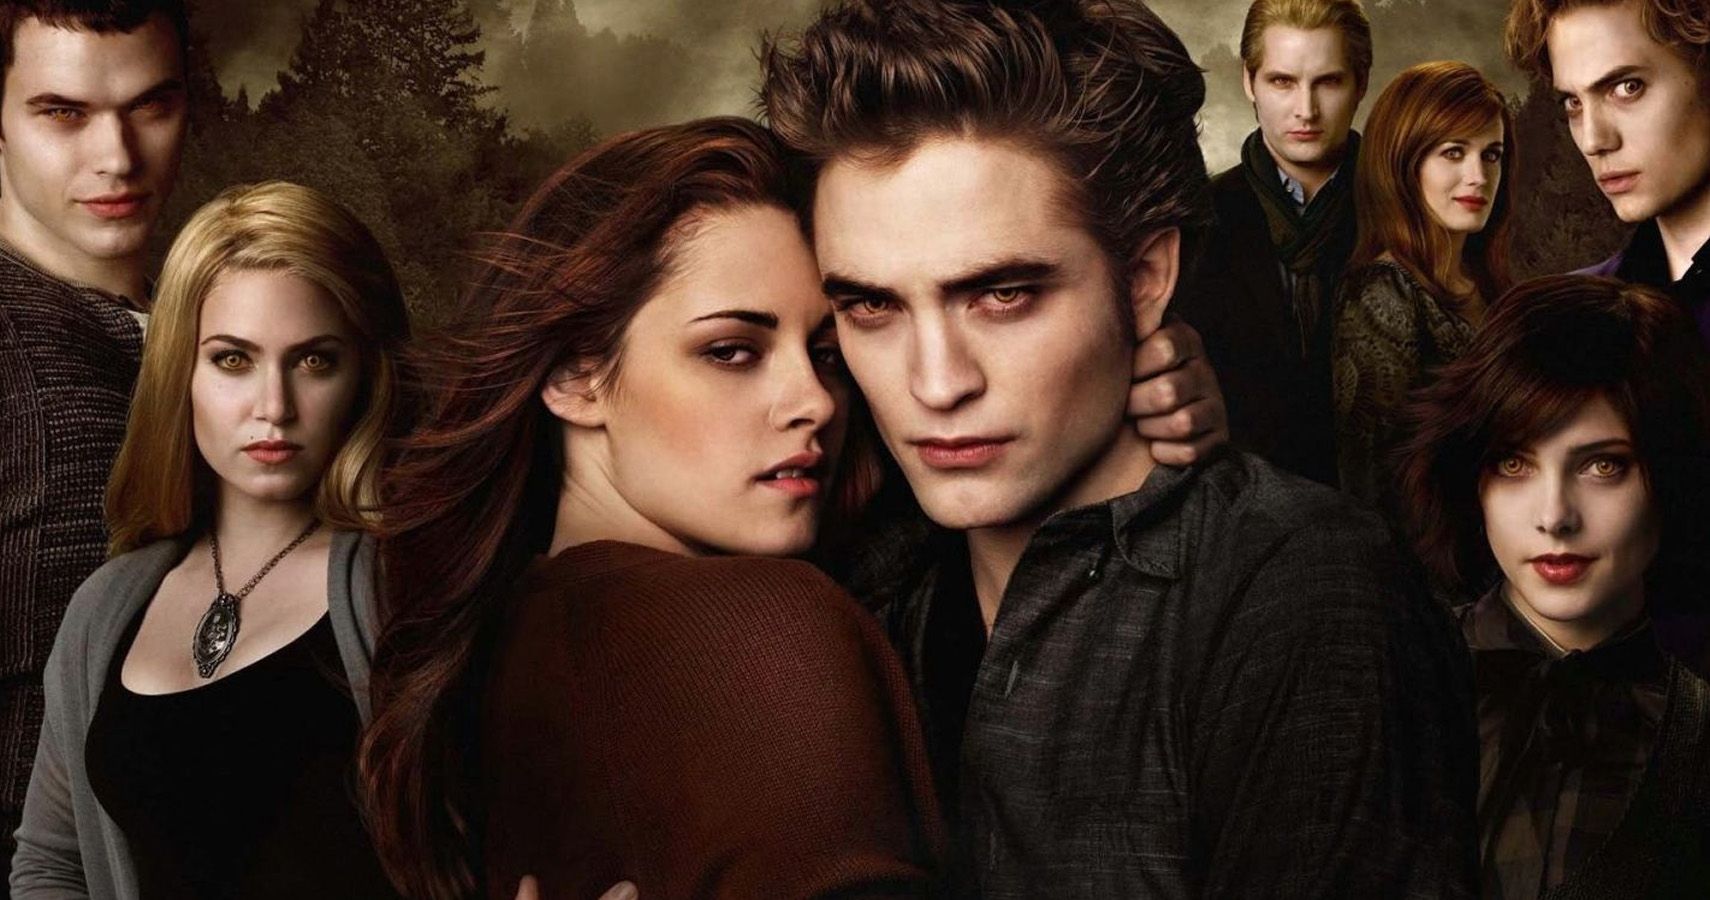 Twilight All the Boyfriends Ranked From Worst to Best